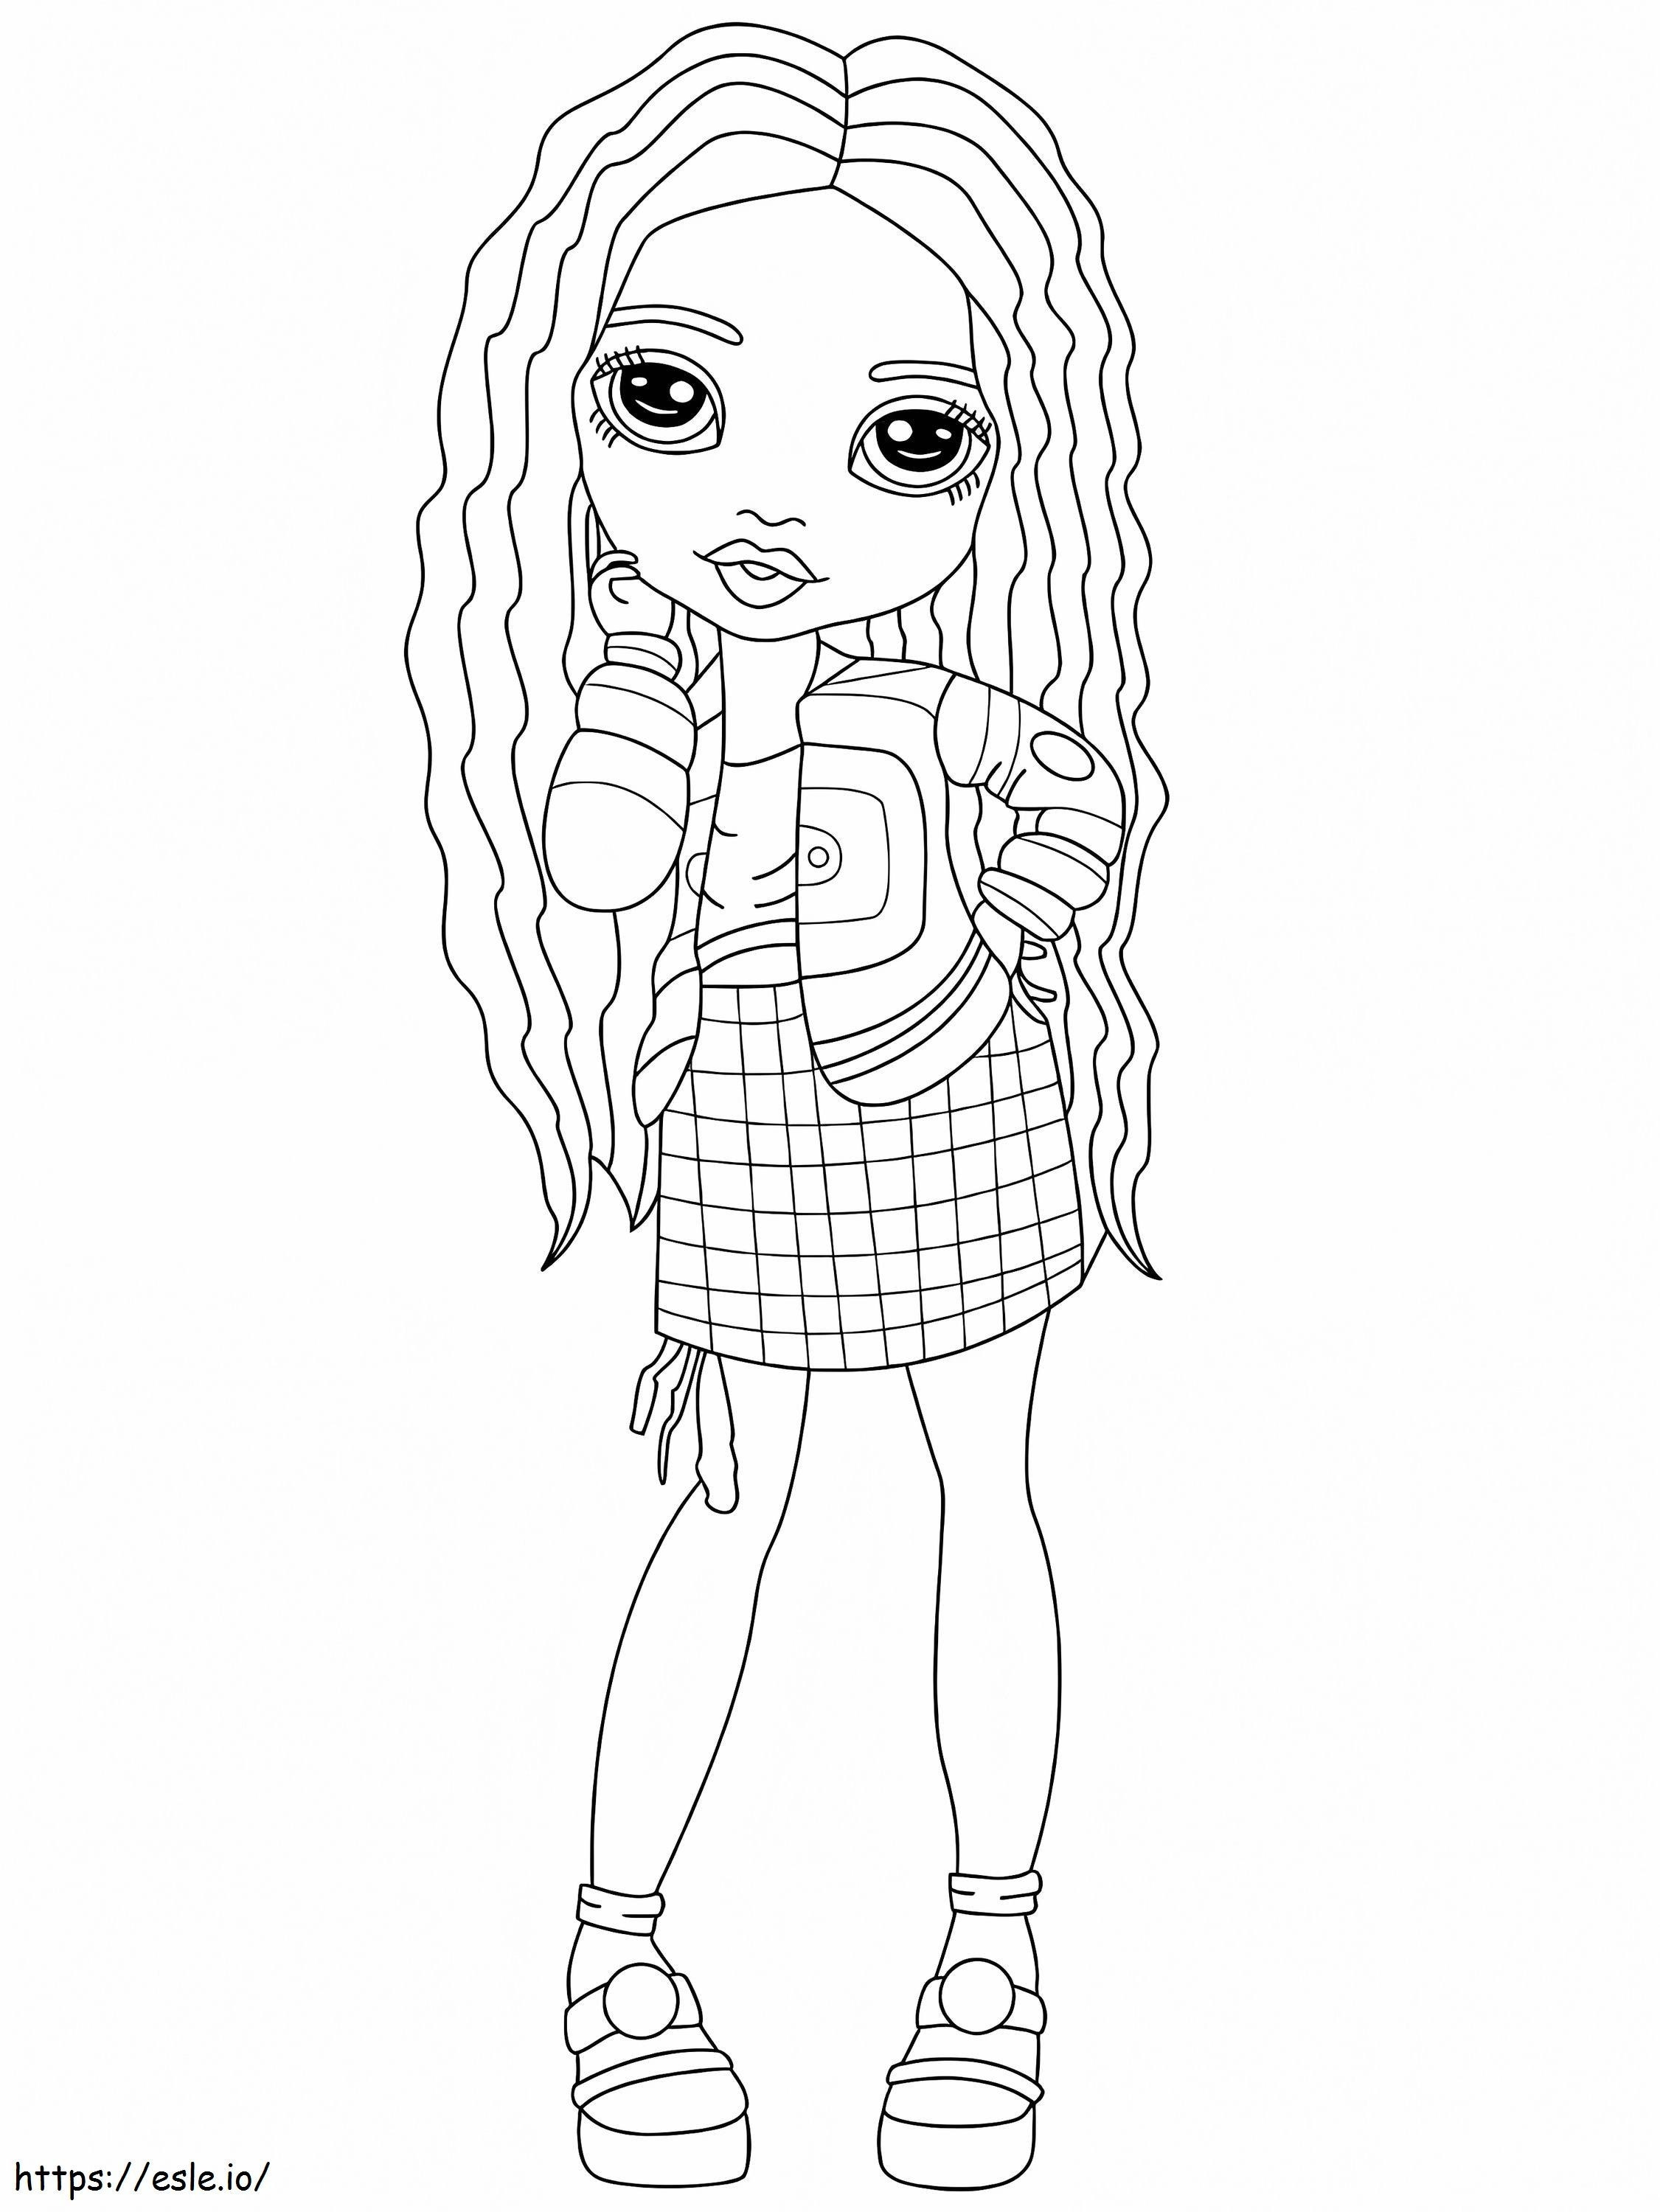 Daphne Minton Rainbow High coloring page